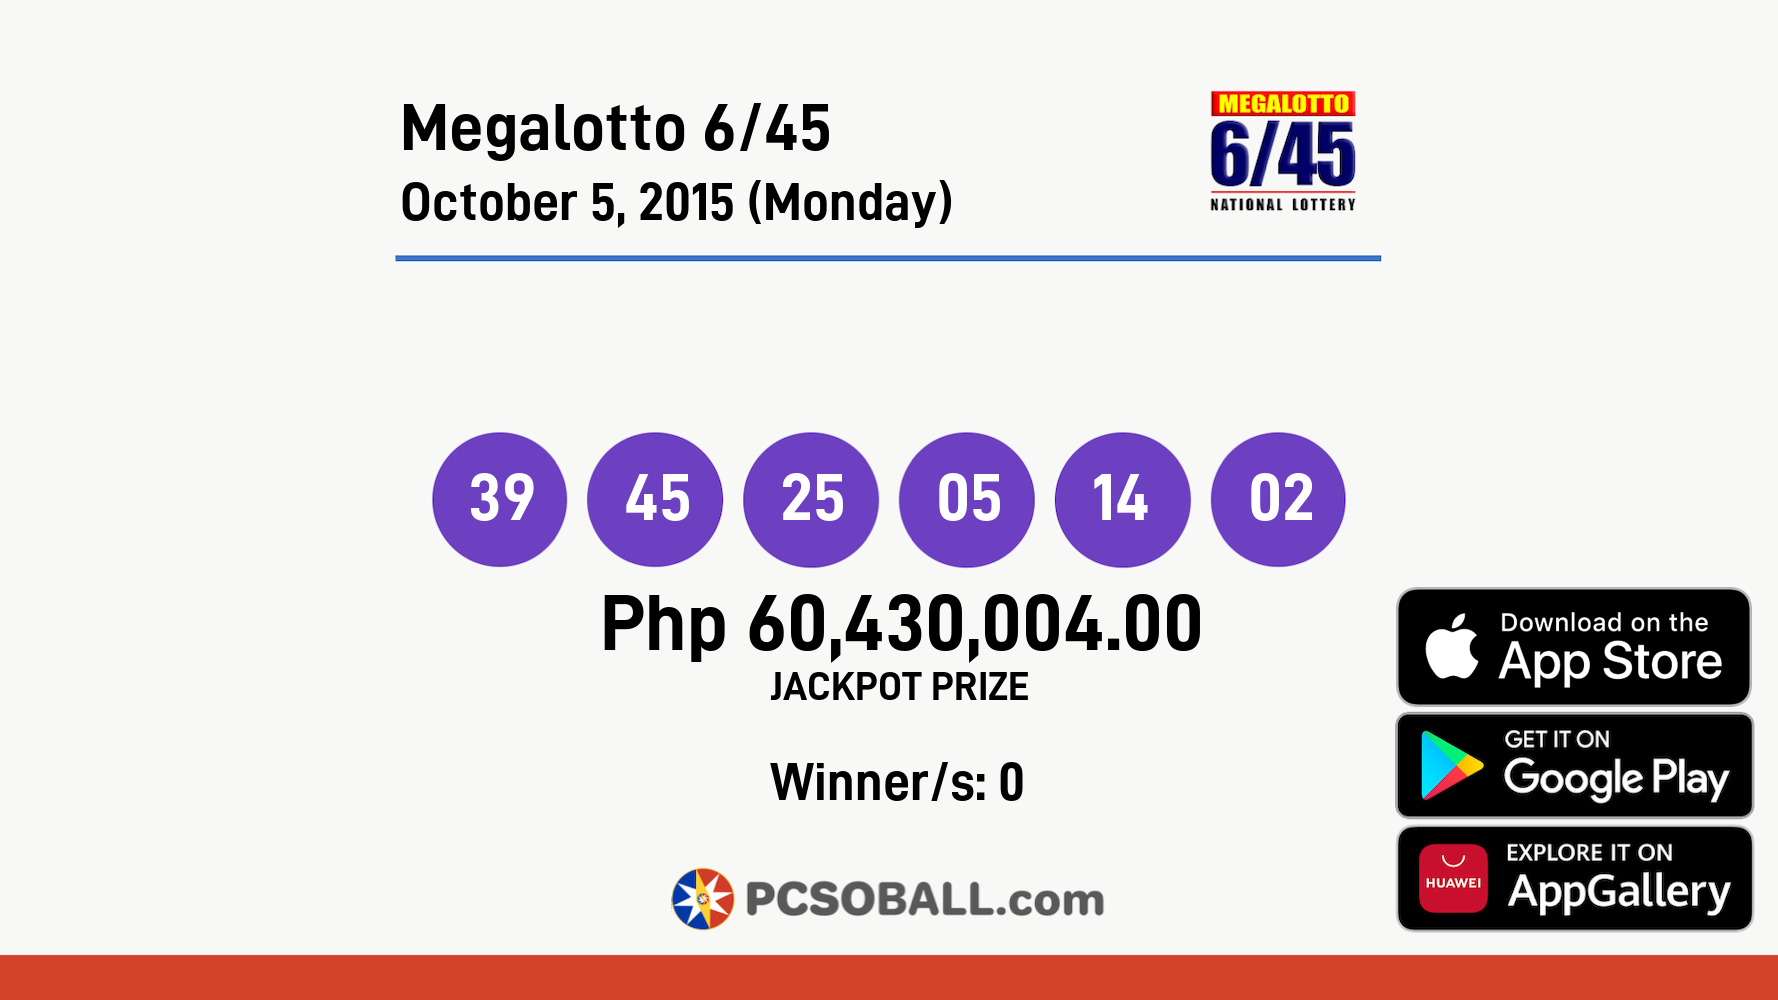 Megalotto 6/45 October 5, 2015 (Monday) Result